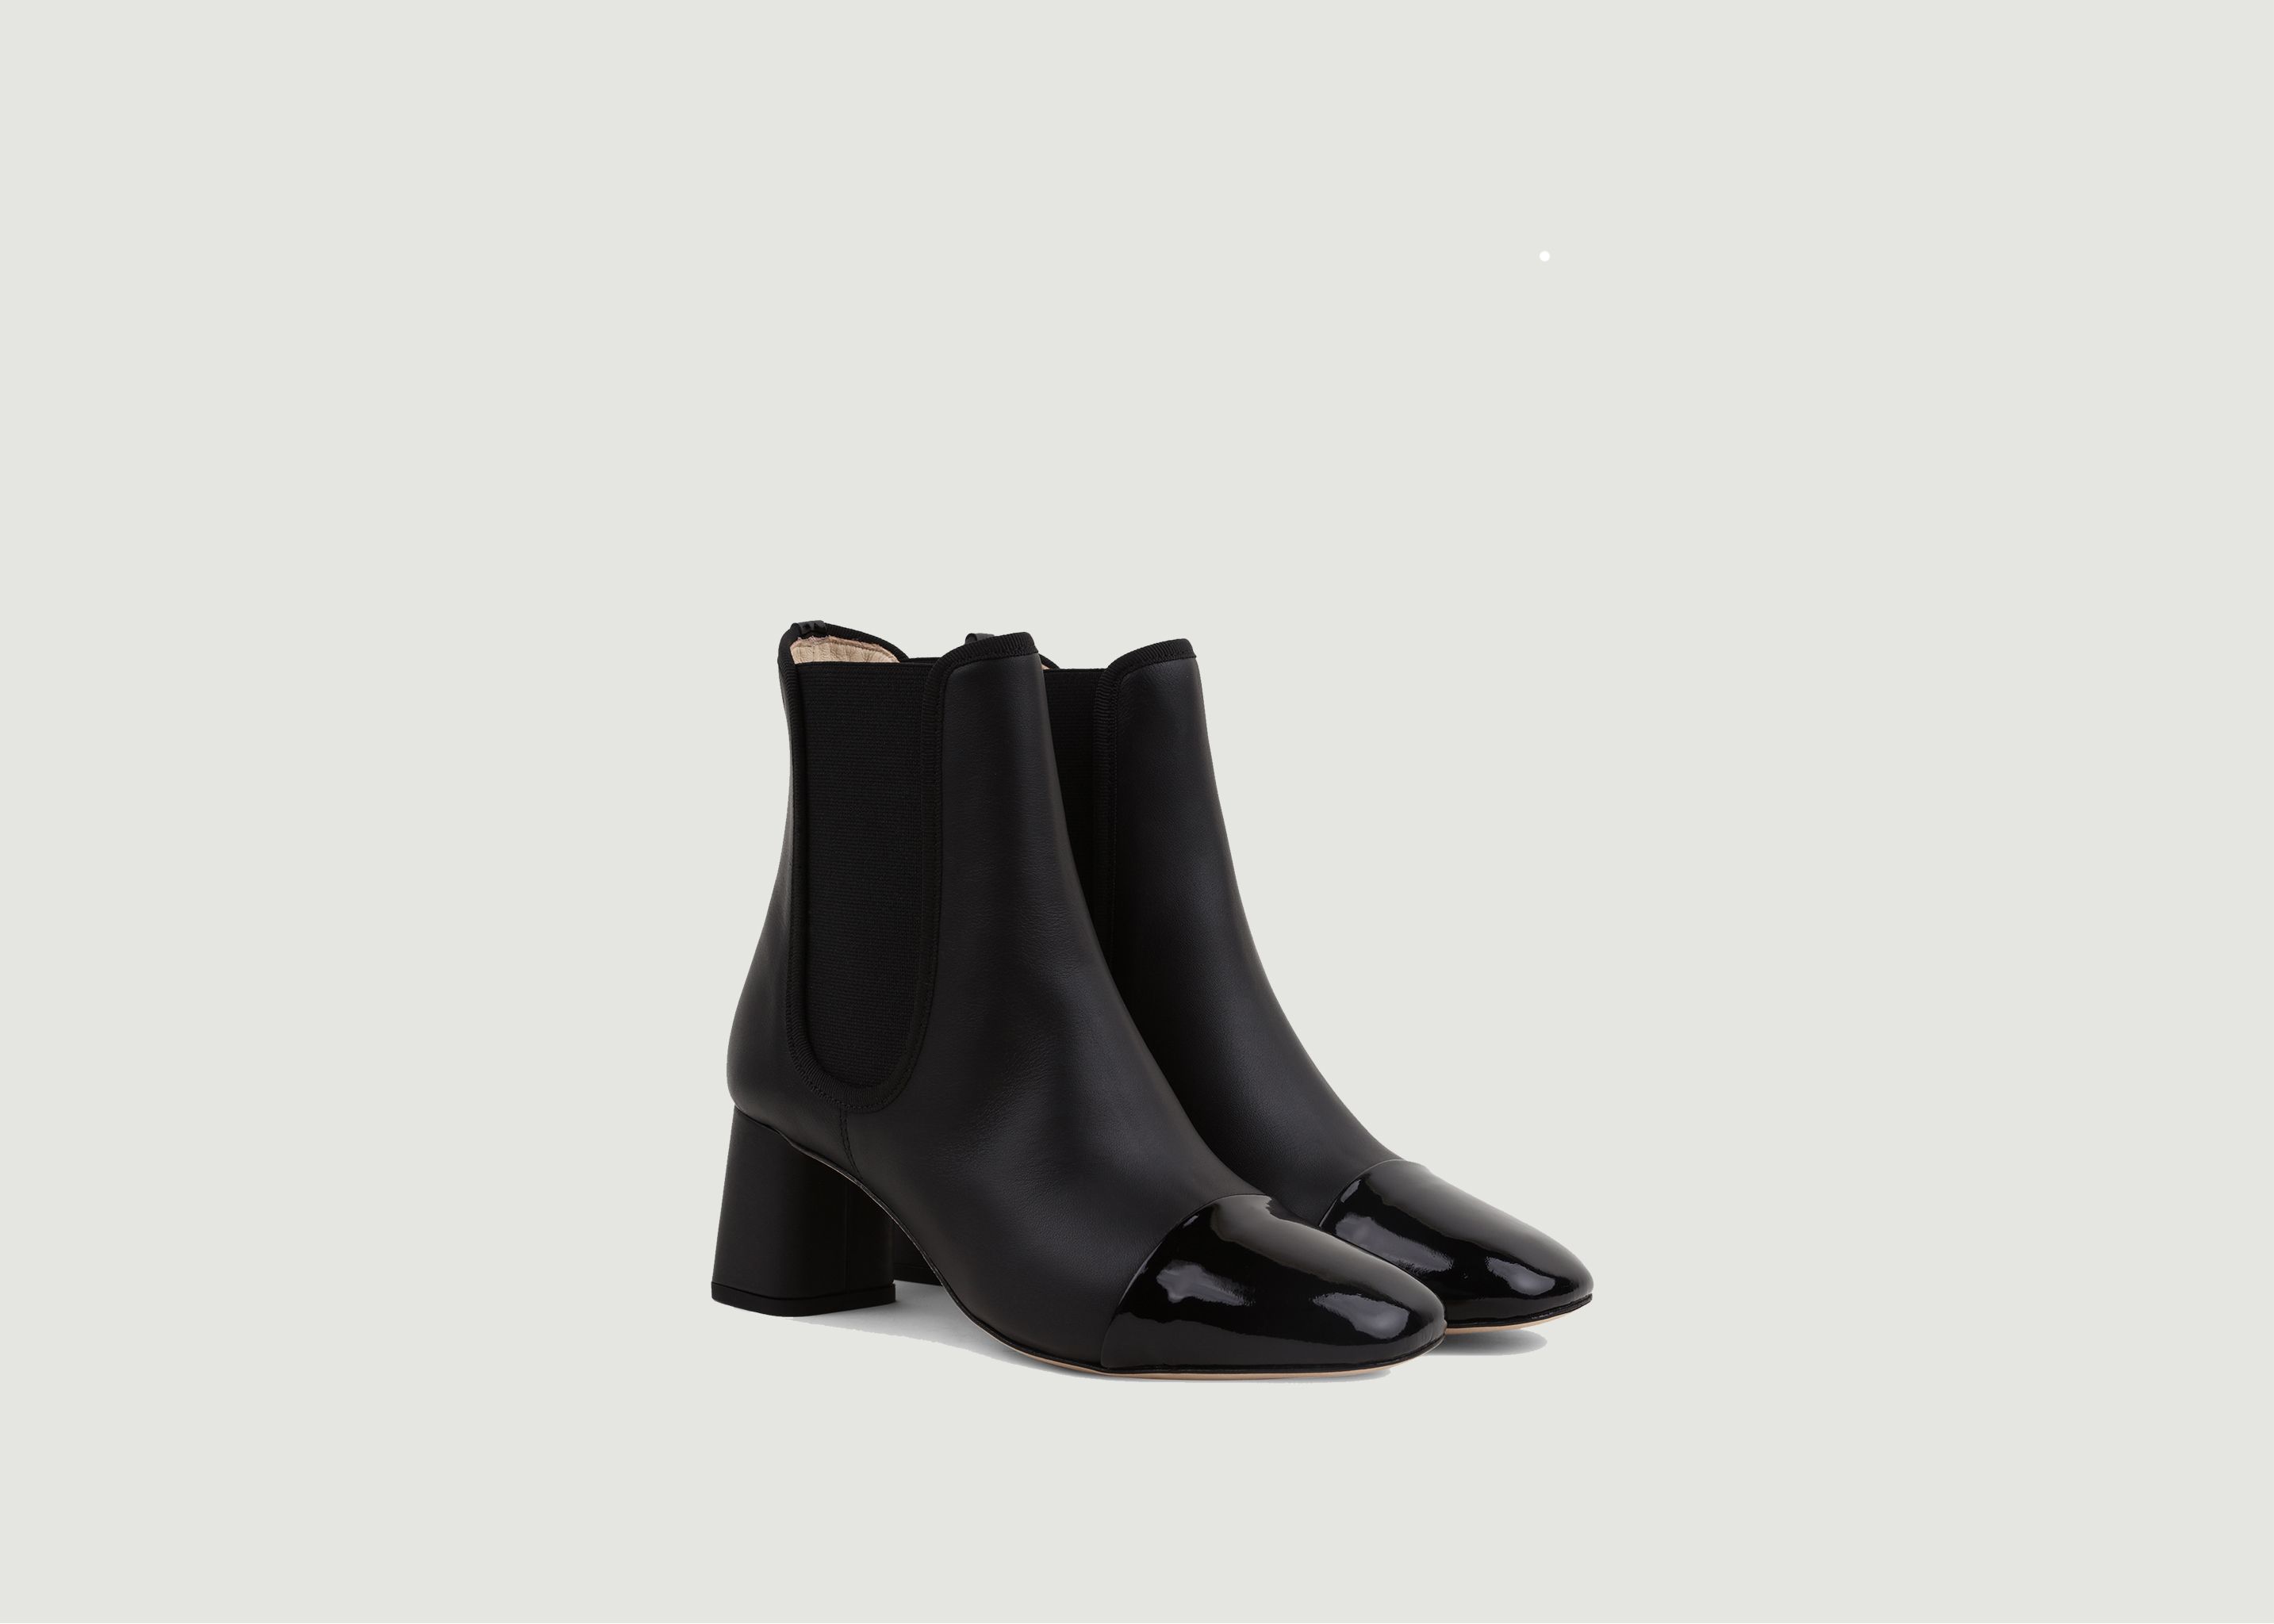 Melissa leather boots - Repetto